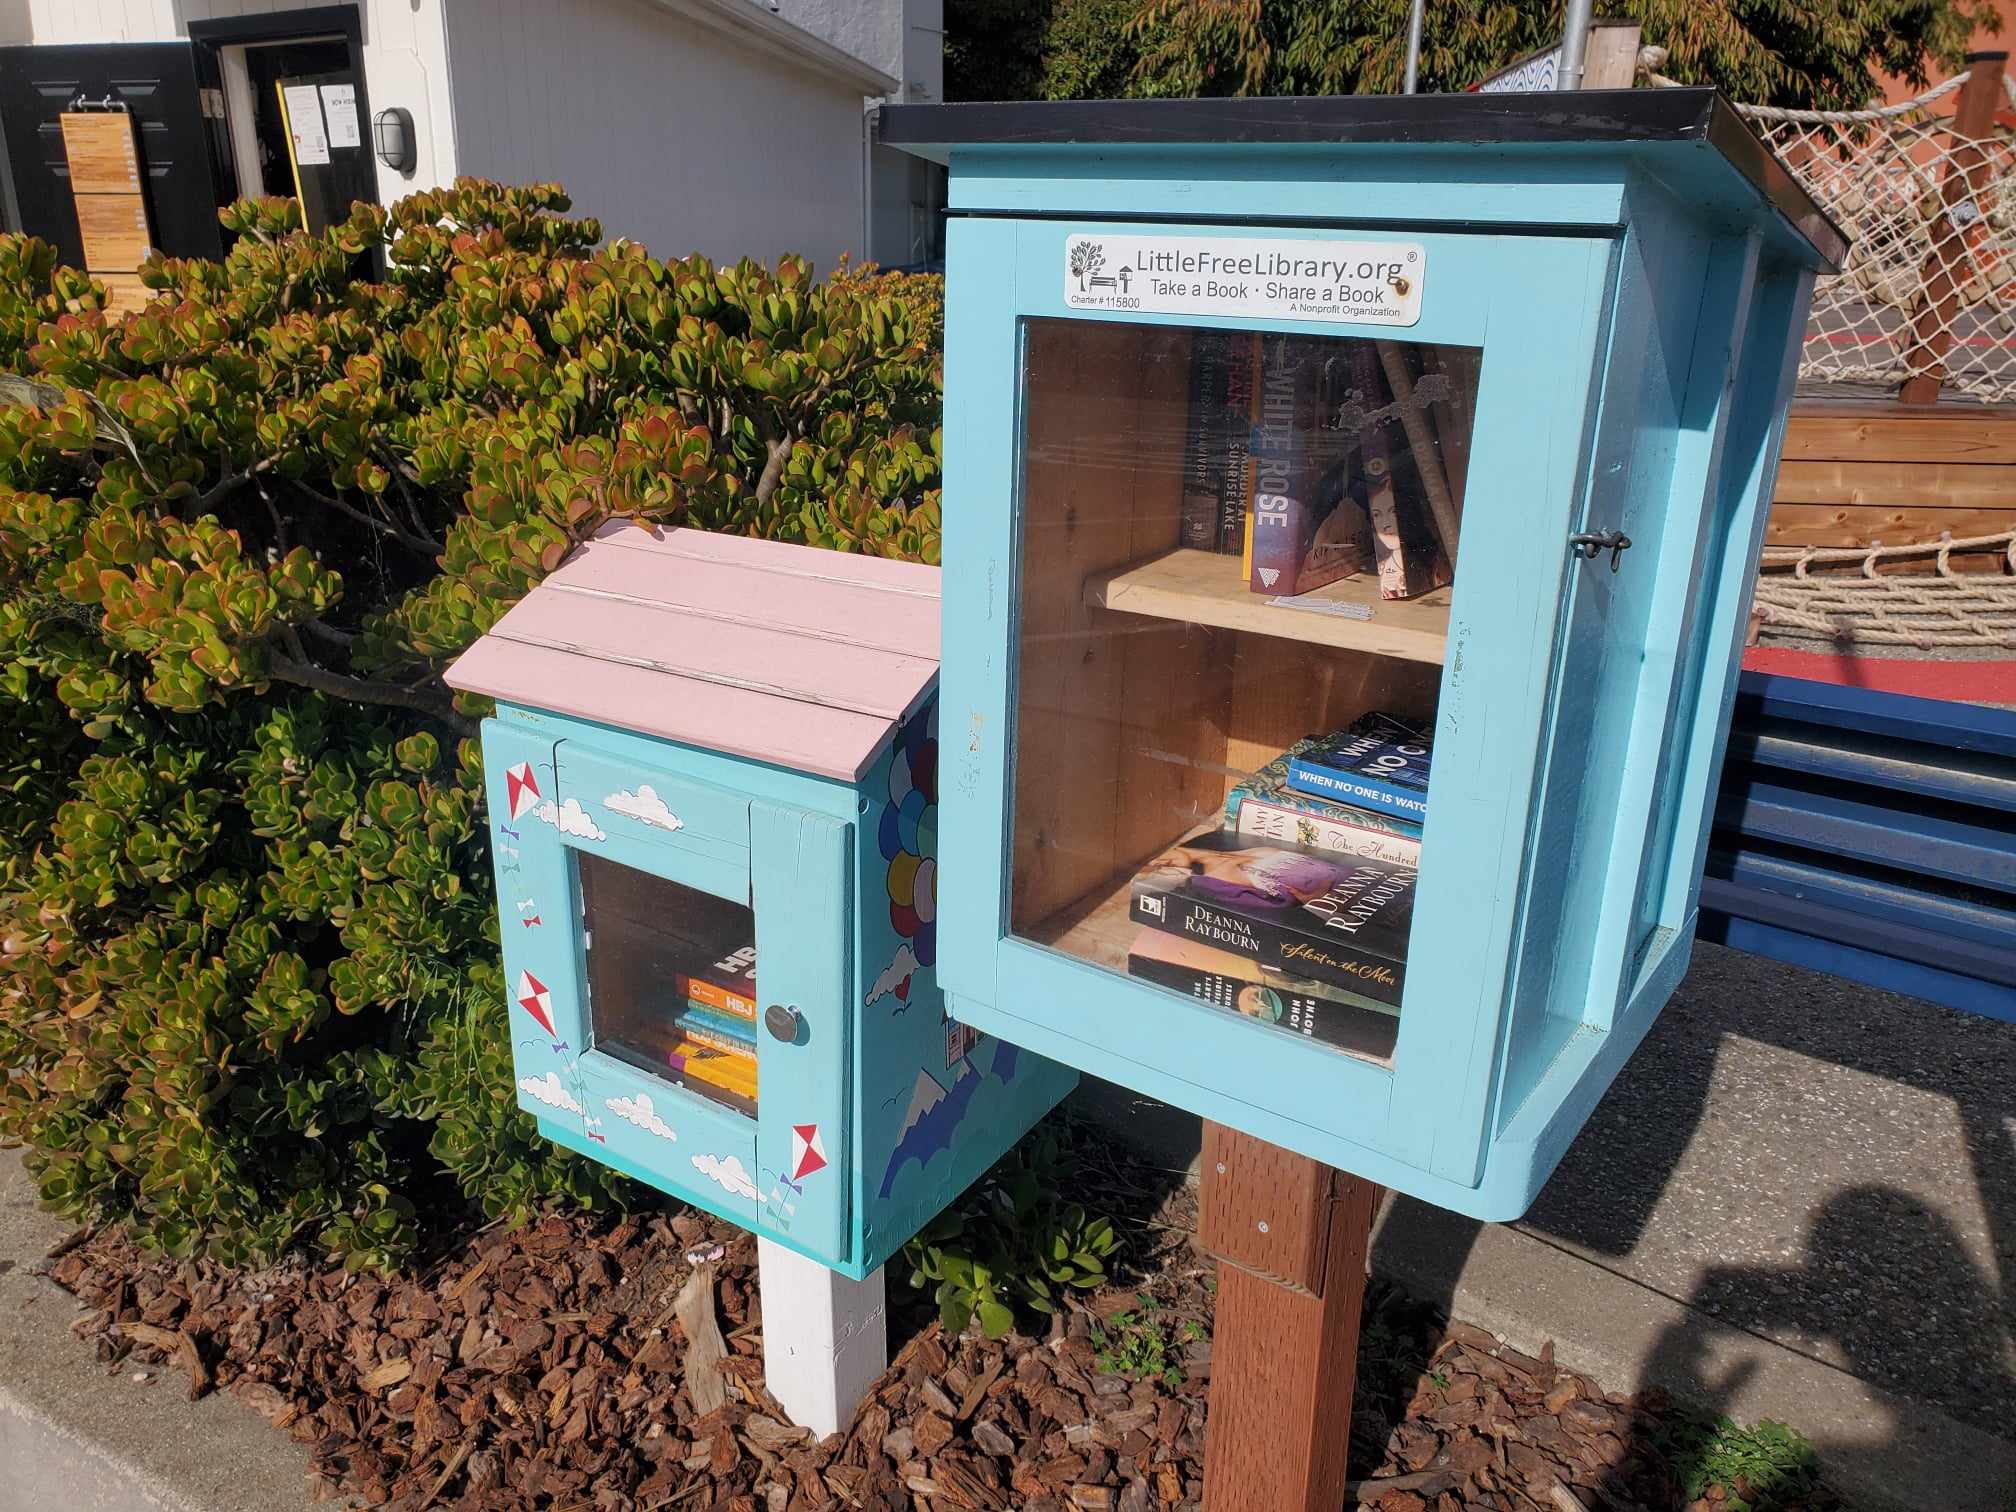 Two blue Little Free Libraries with many books inside beside a parking lot converted into a gathering space.